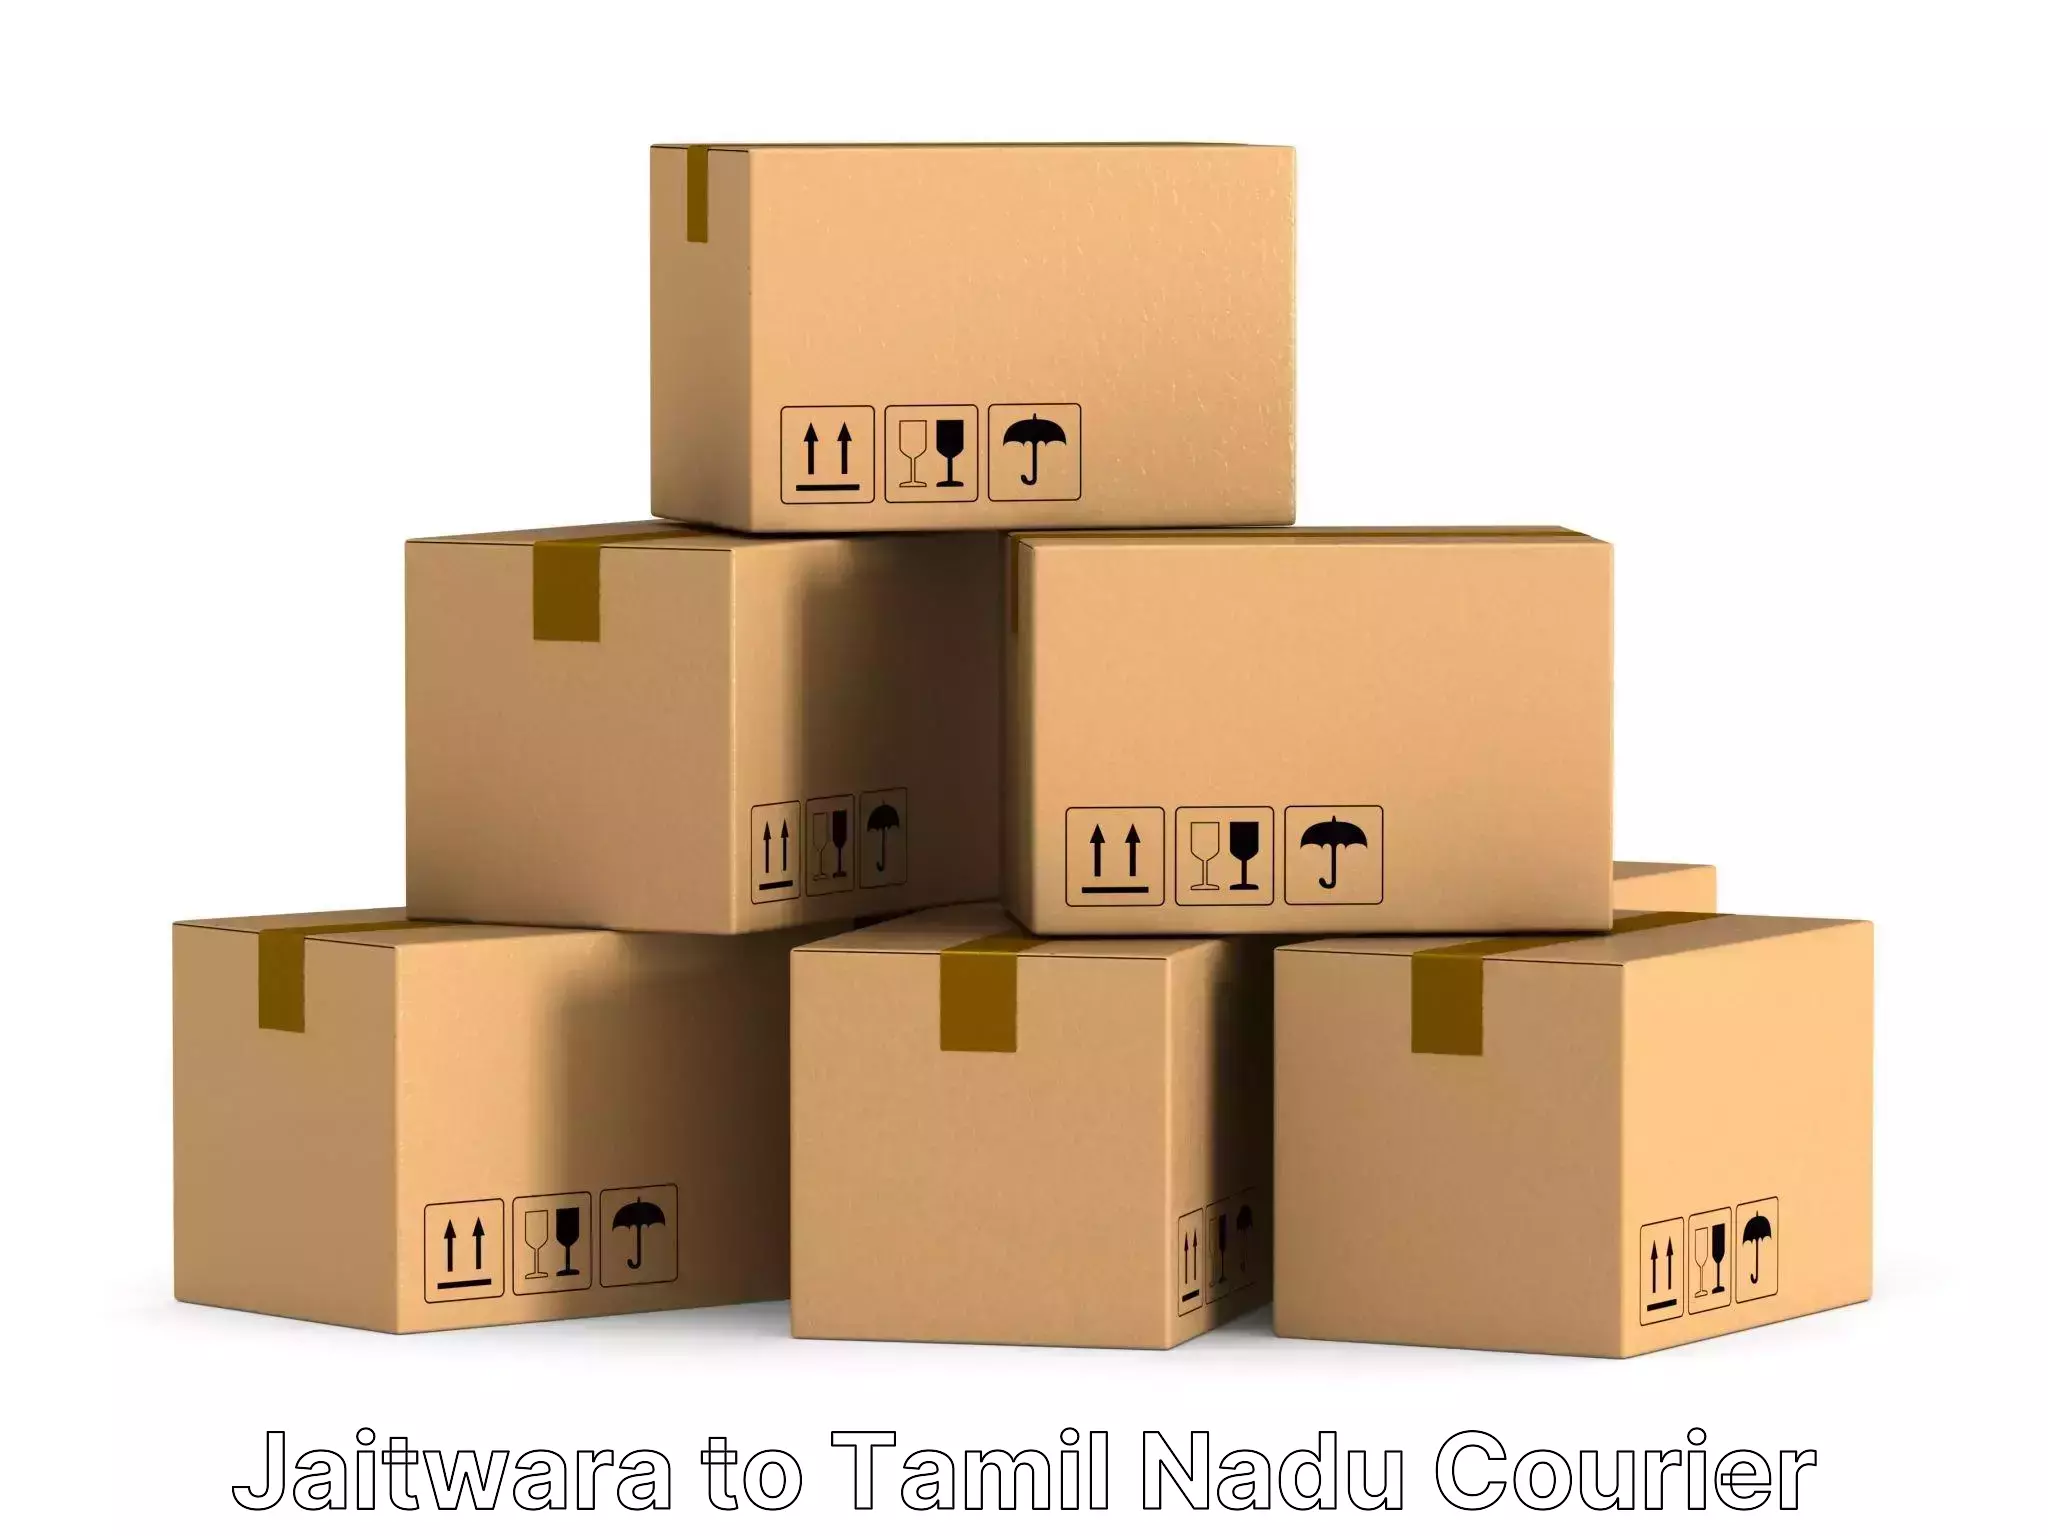 Professional moving assistance Jaitwara to Vellore